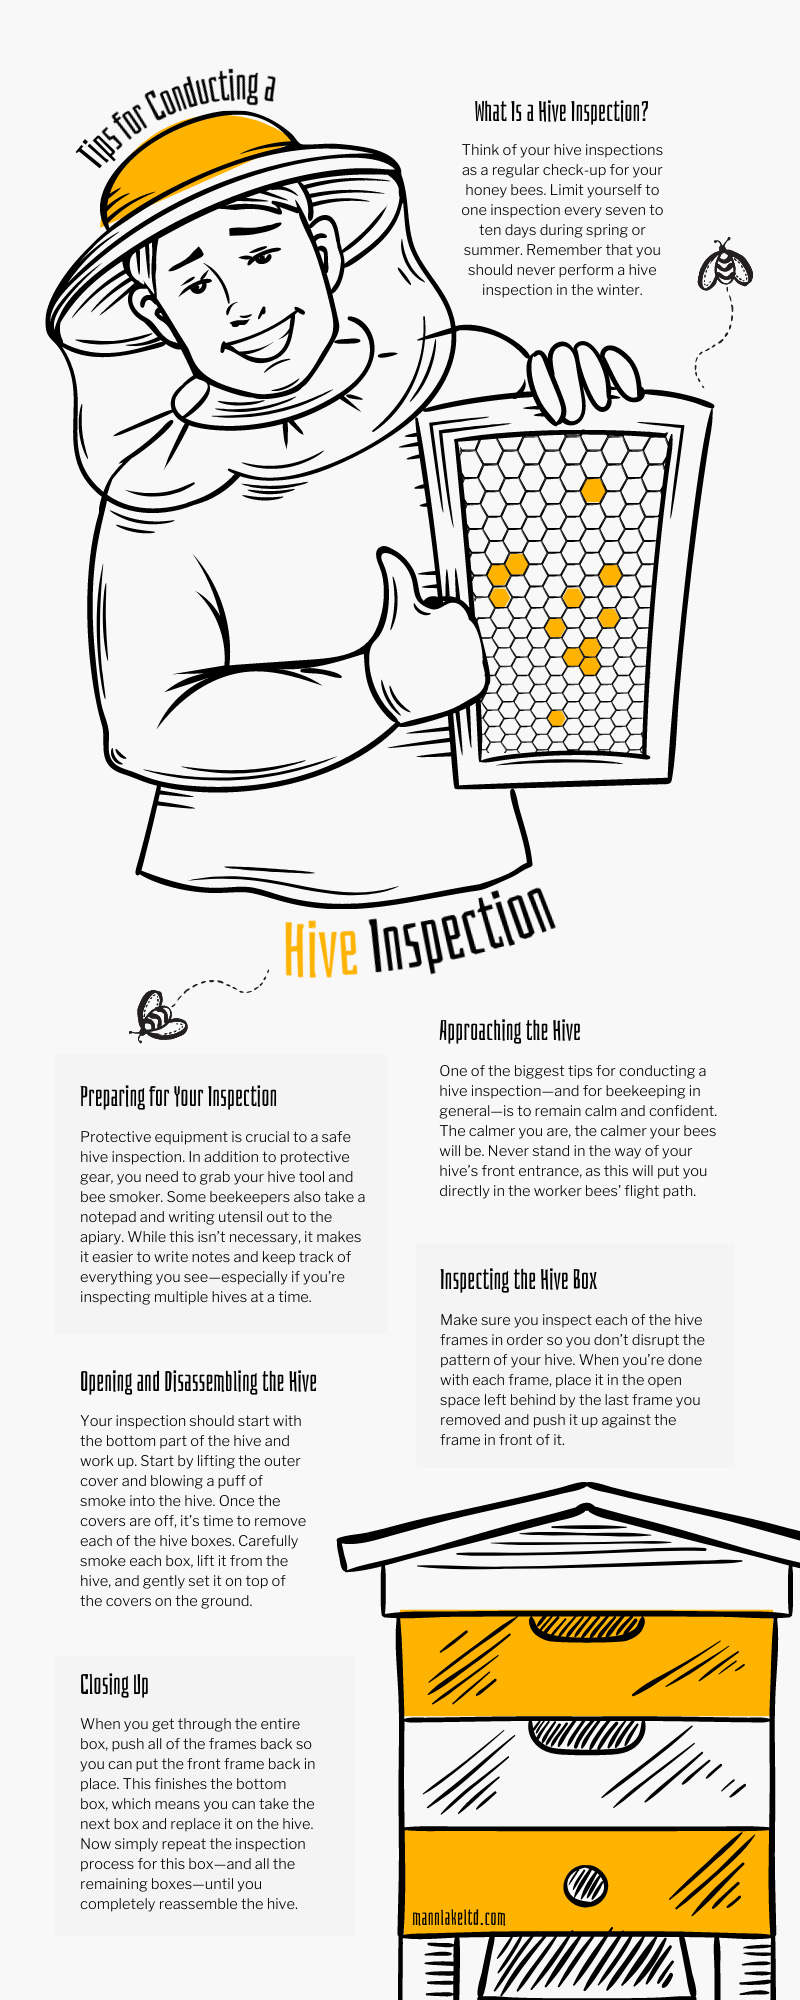 Tips For Conducting A Hive Inspection, Mann Lake Ltd